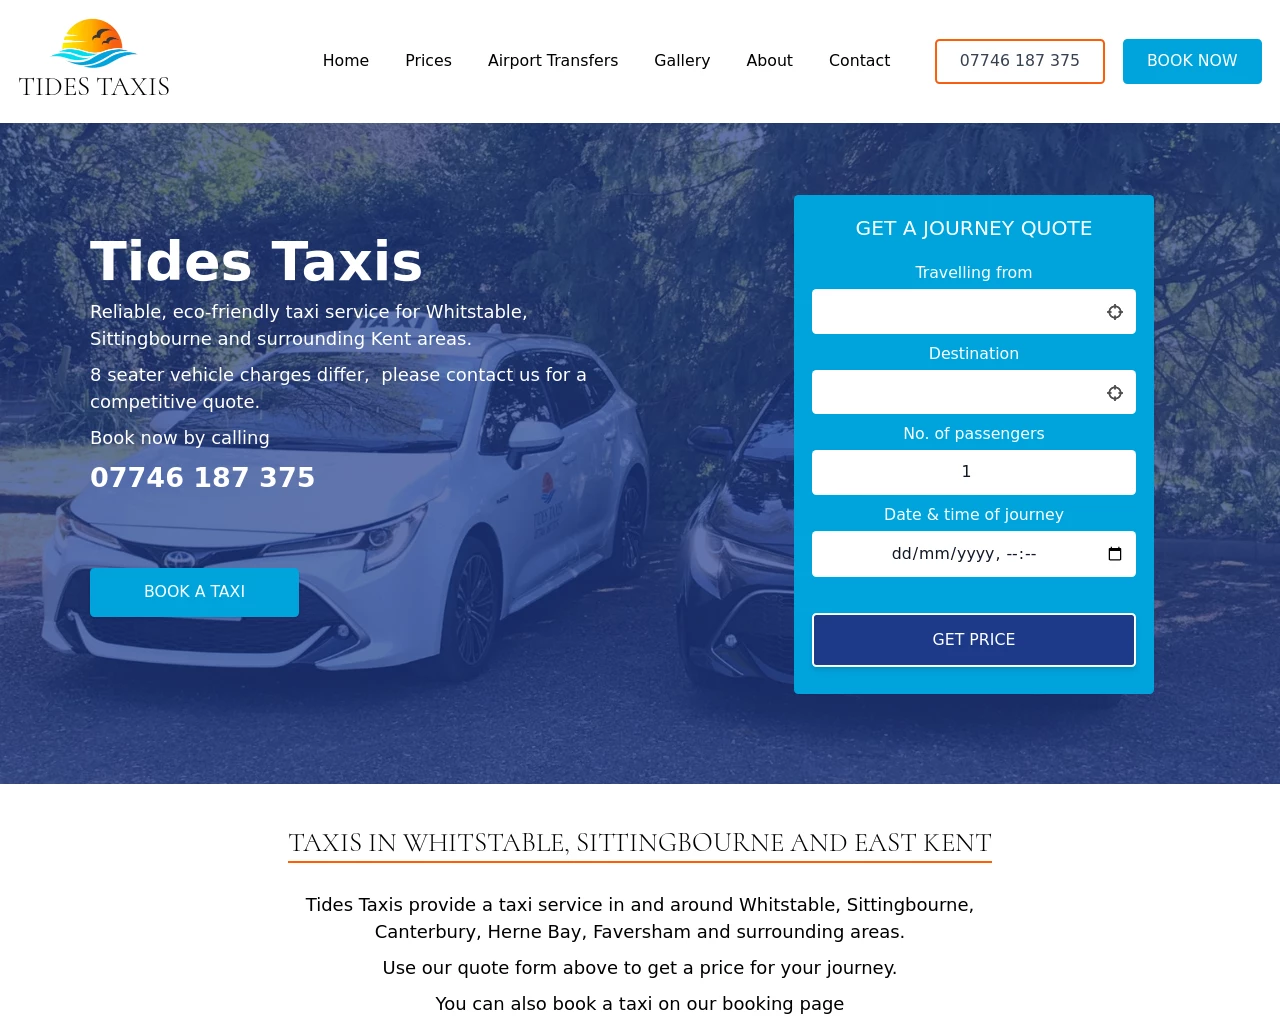 Tides Taxis